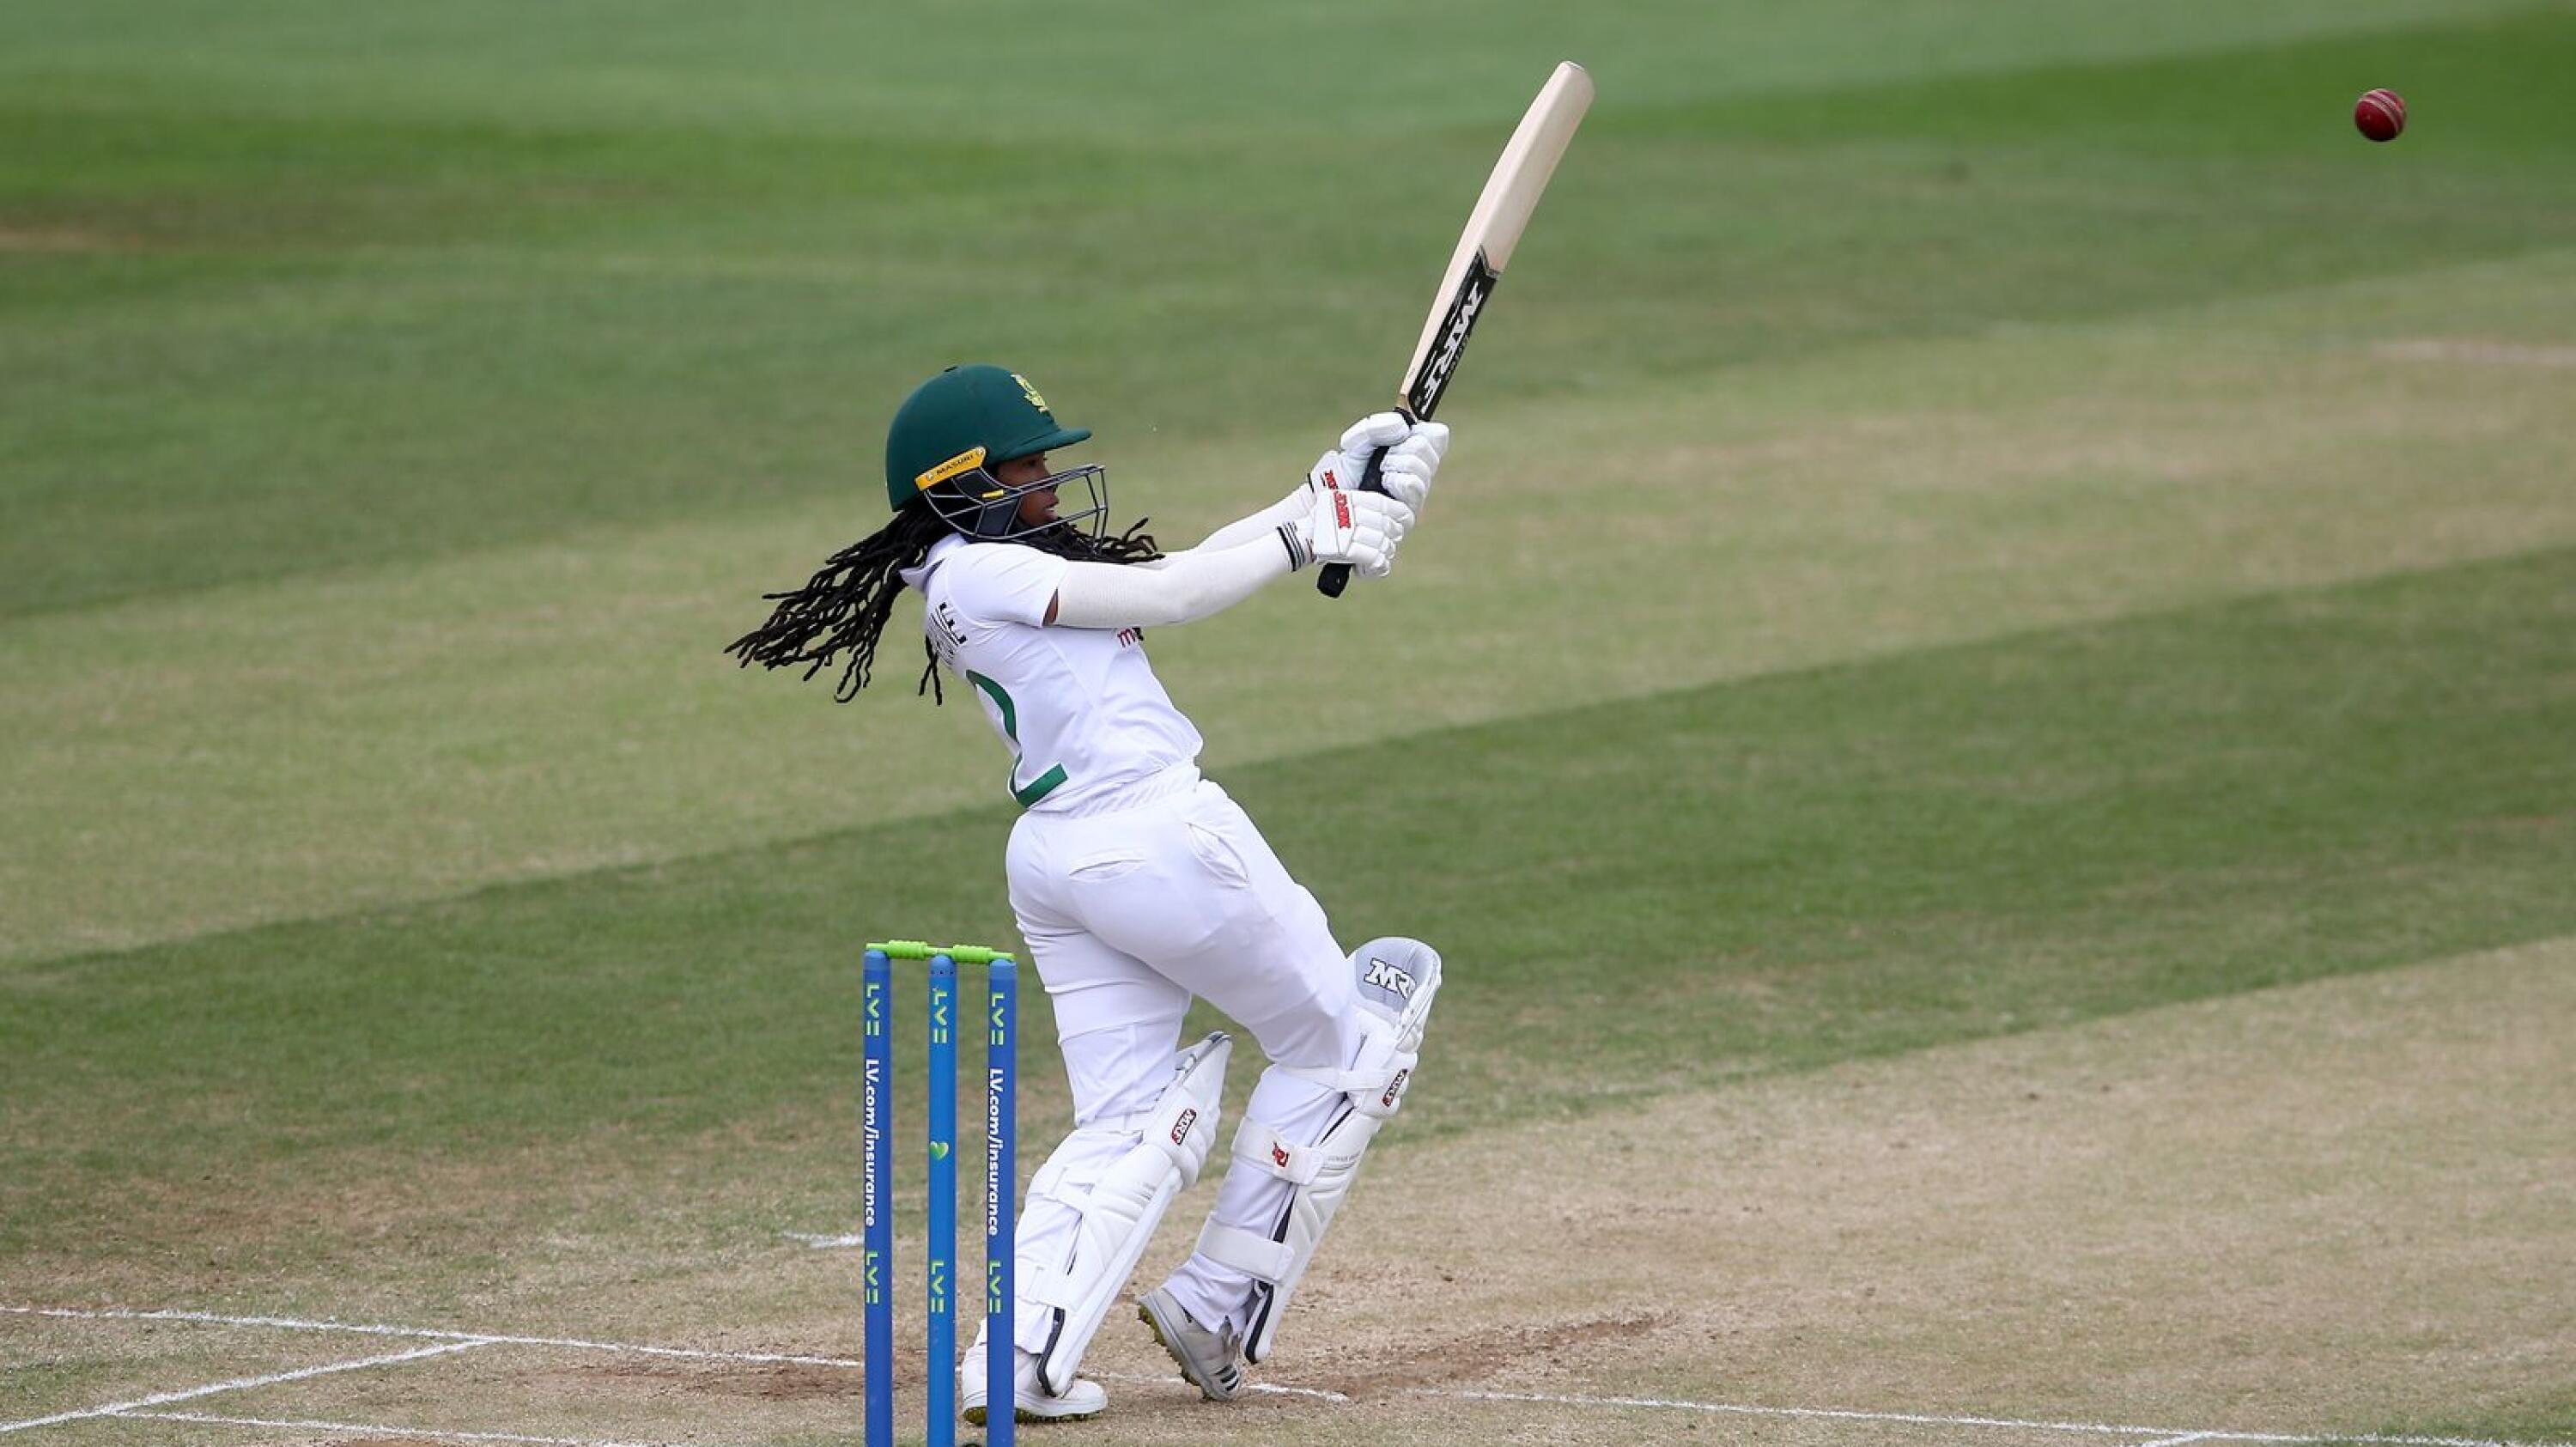 Tumi Sekhukhune of South Africa hits the ball during day four of their once-off Test match against England at Cooper Associates County Ground in Taunton on Thursday